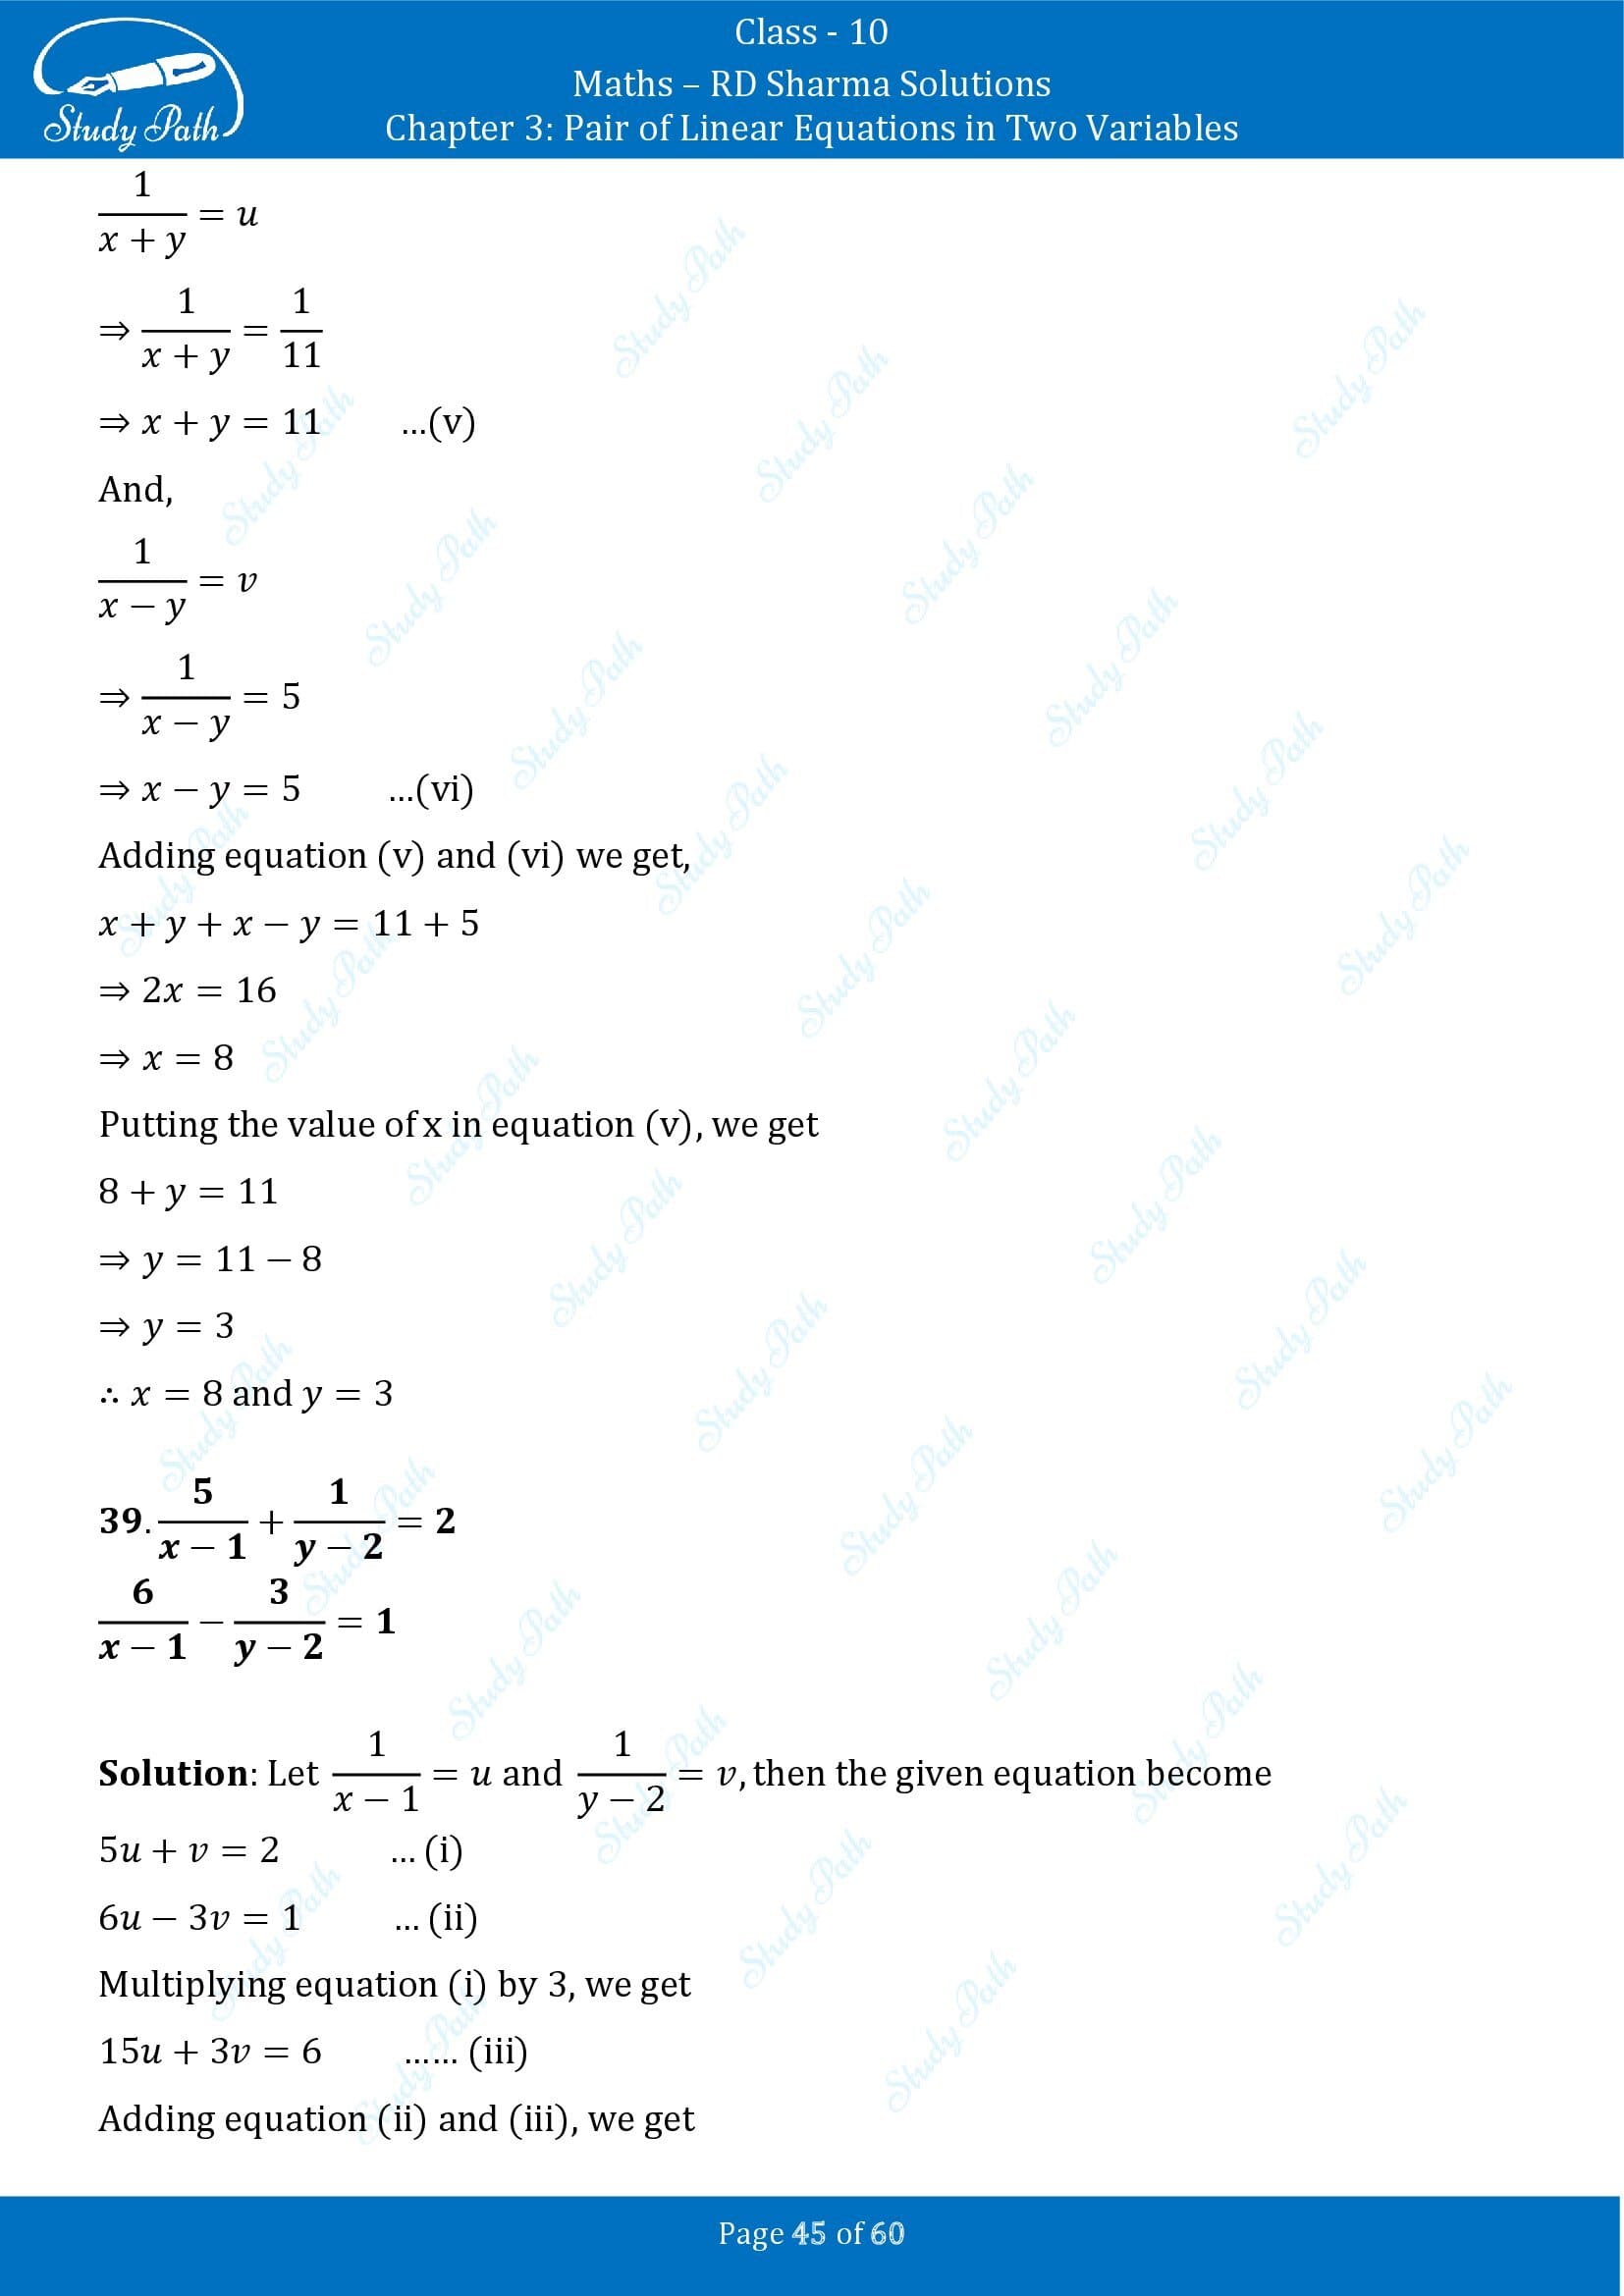 RD Sharma Solutions Class 10 Chapter 3 Pair of Linear Equations in Two Variables Exercise 3.3 00045